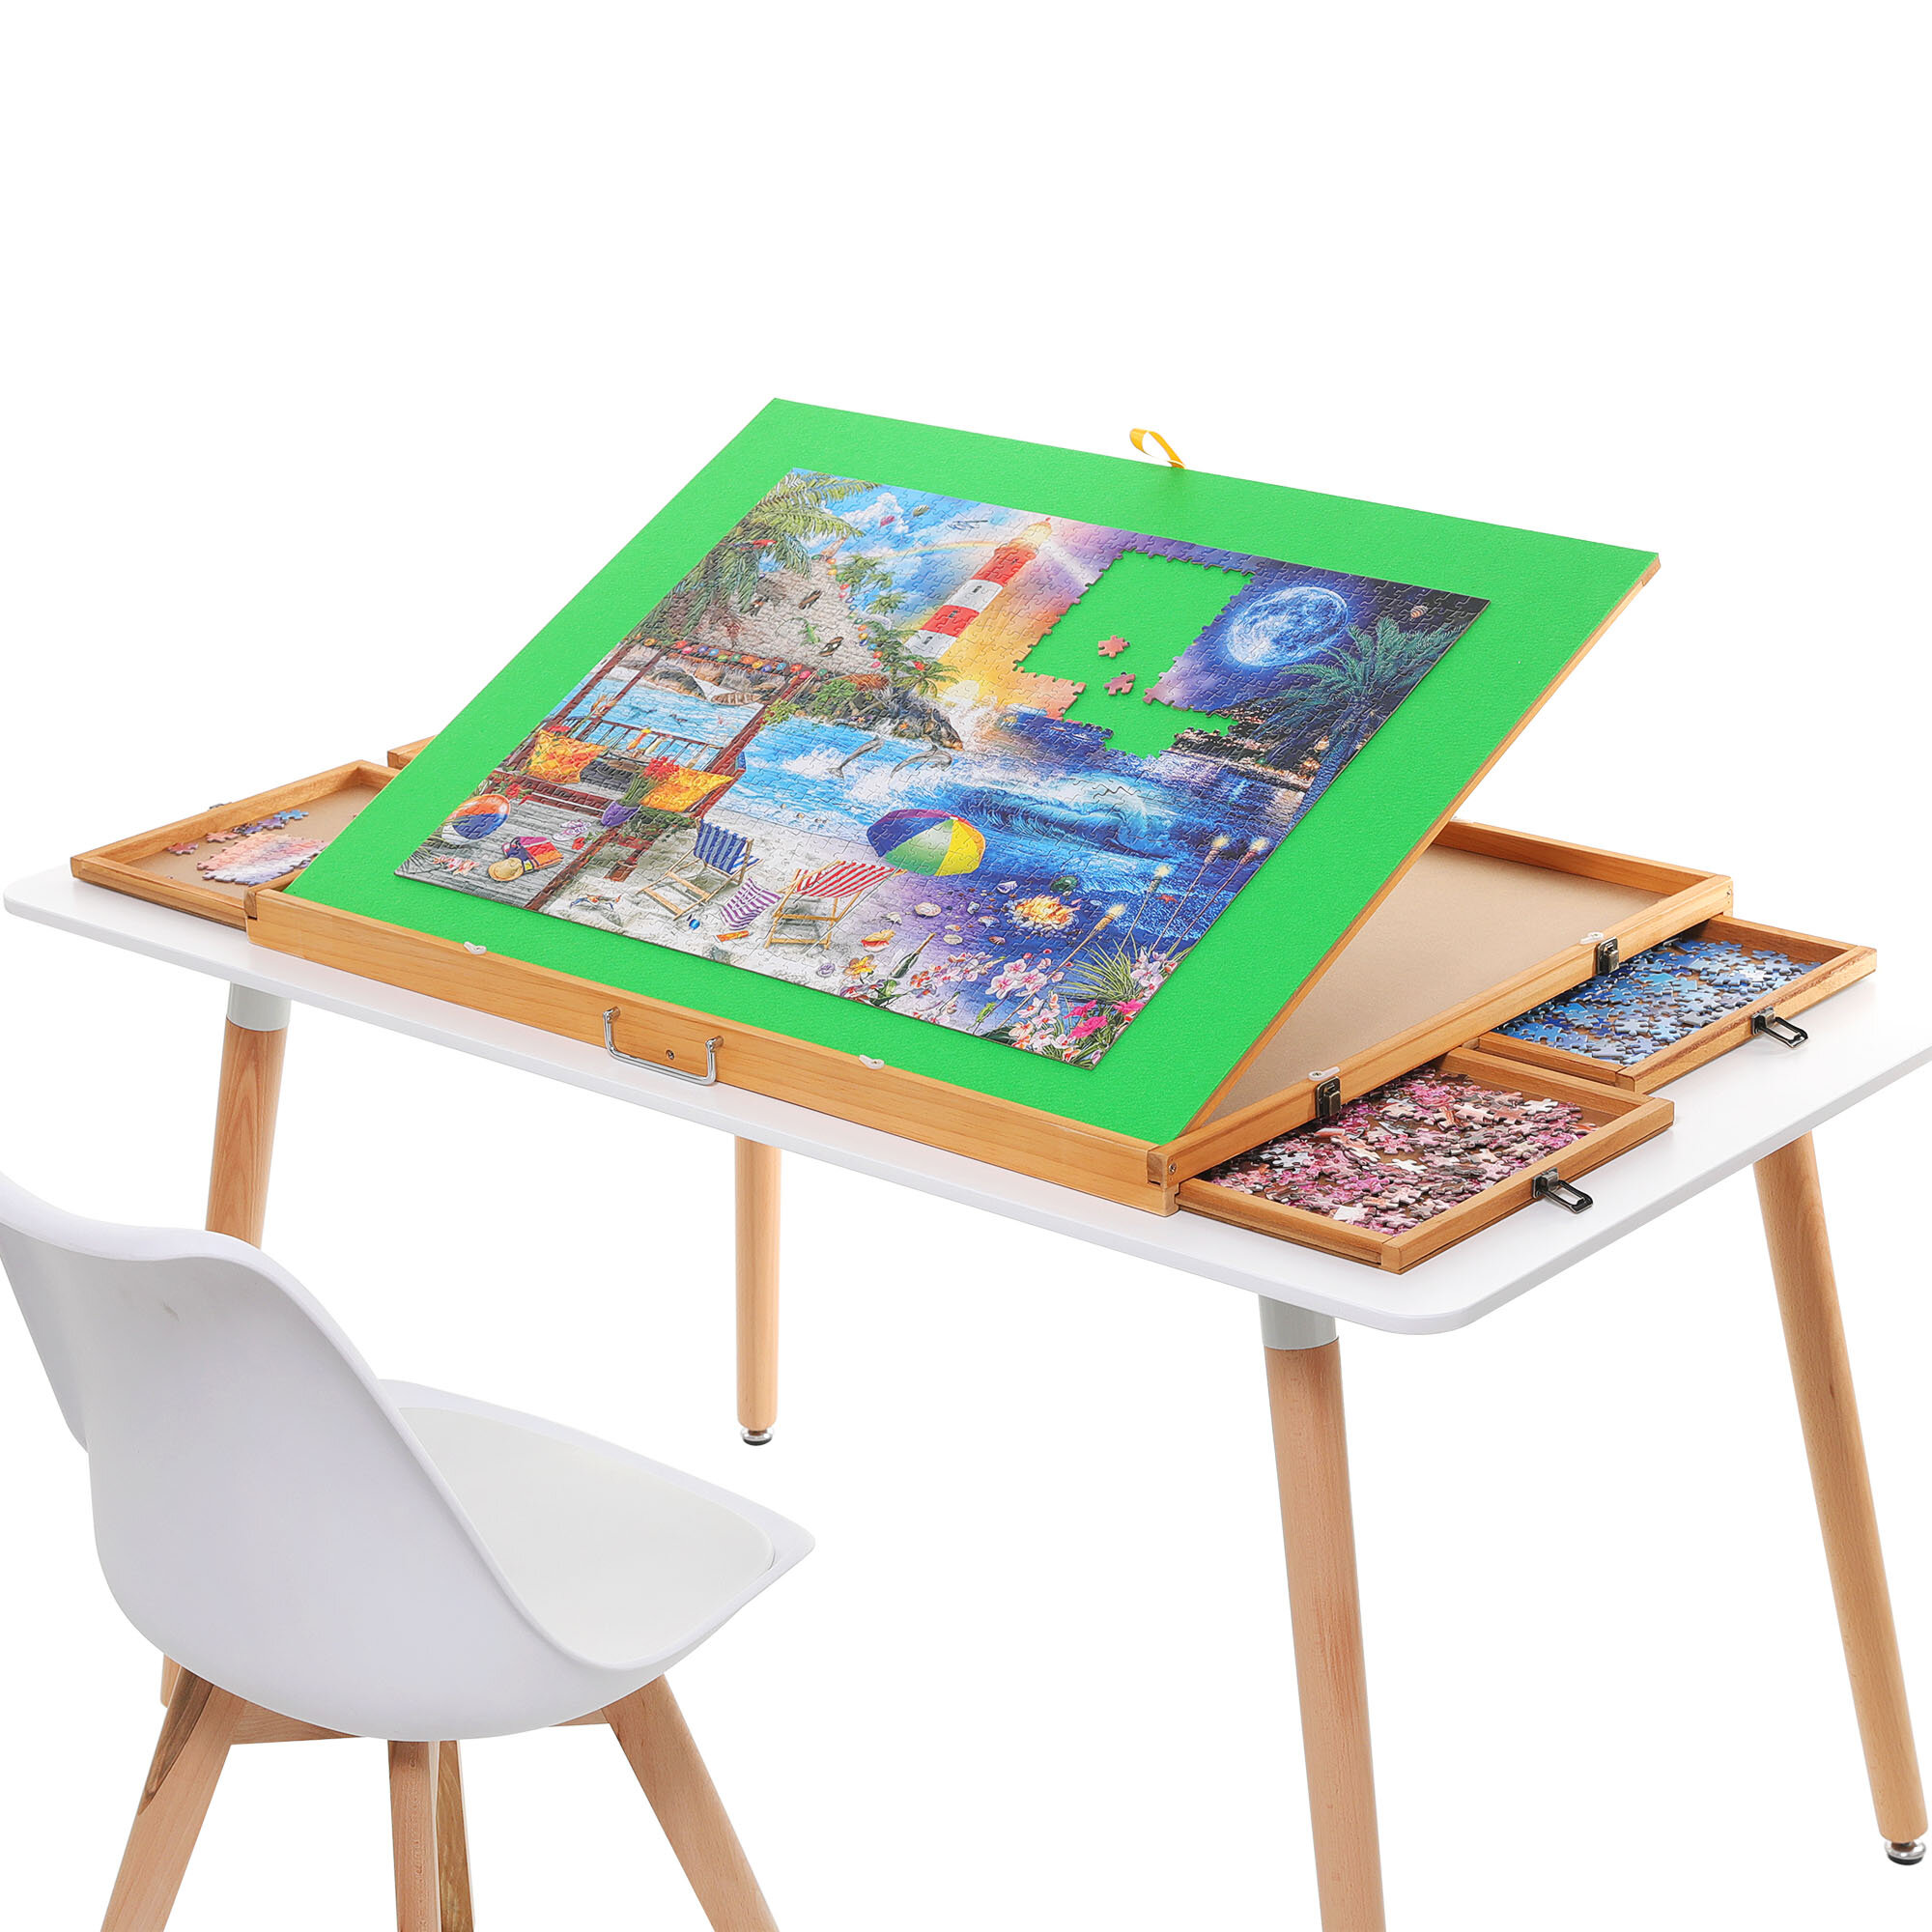 1000 Piece Wooden Jigsaw Puzzle Board - 4 Drawers, Rotating Puzzle Table, 30” X 22” Jigsaw Puzzle Table